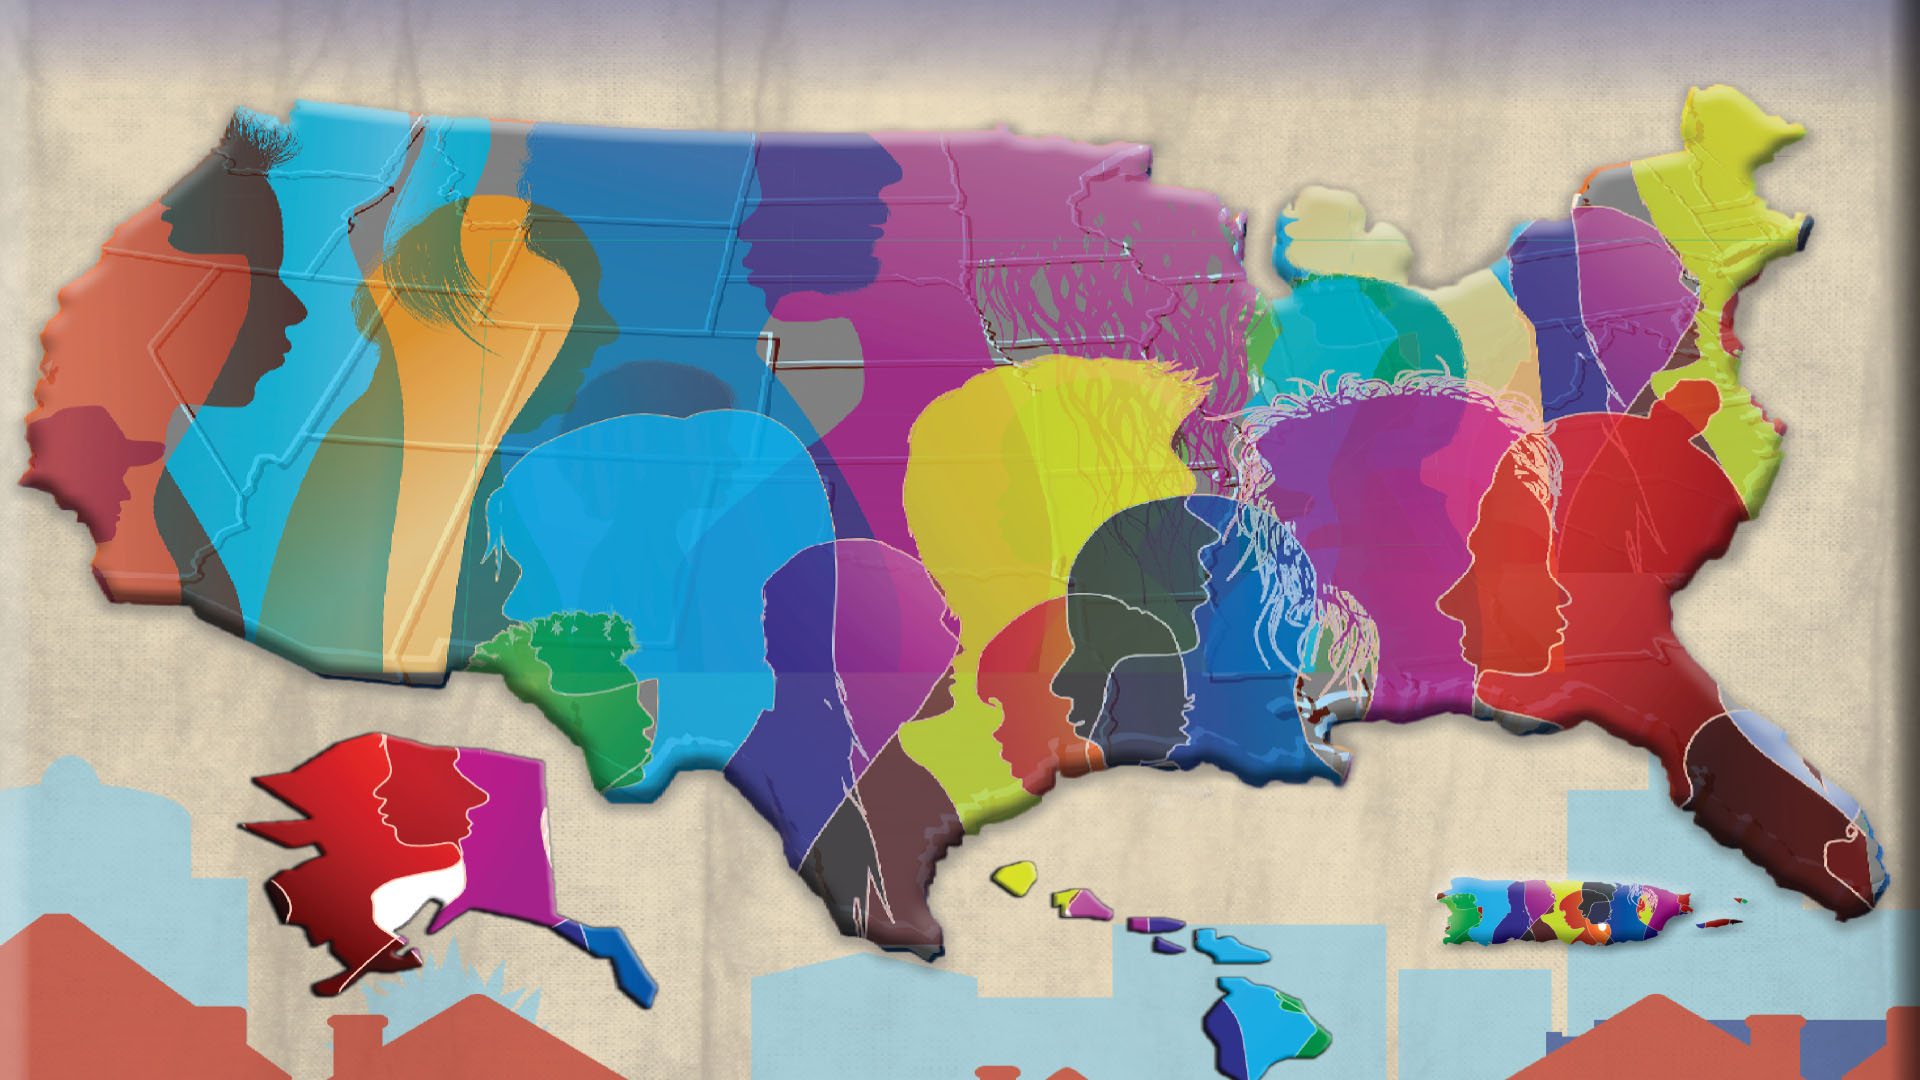 Decorative map showing the US map overlayed with colorful silhouettes of people